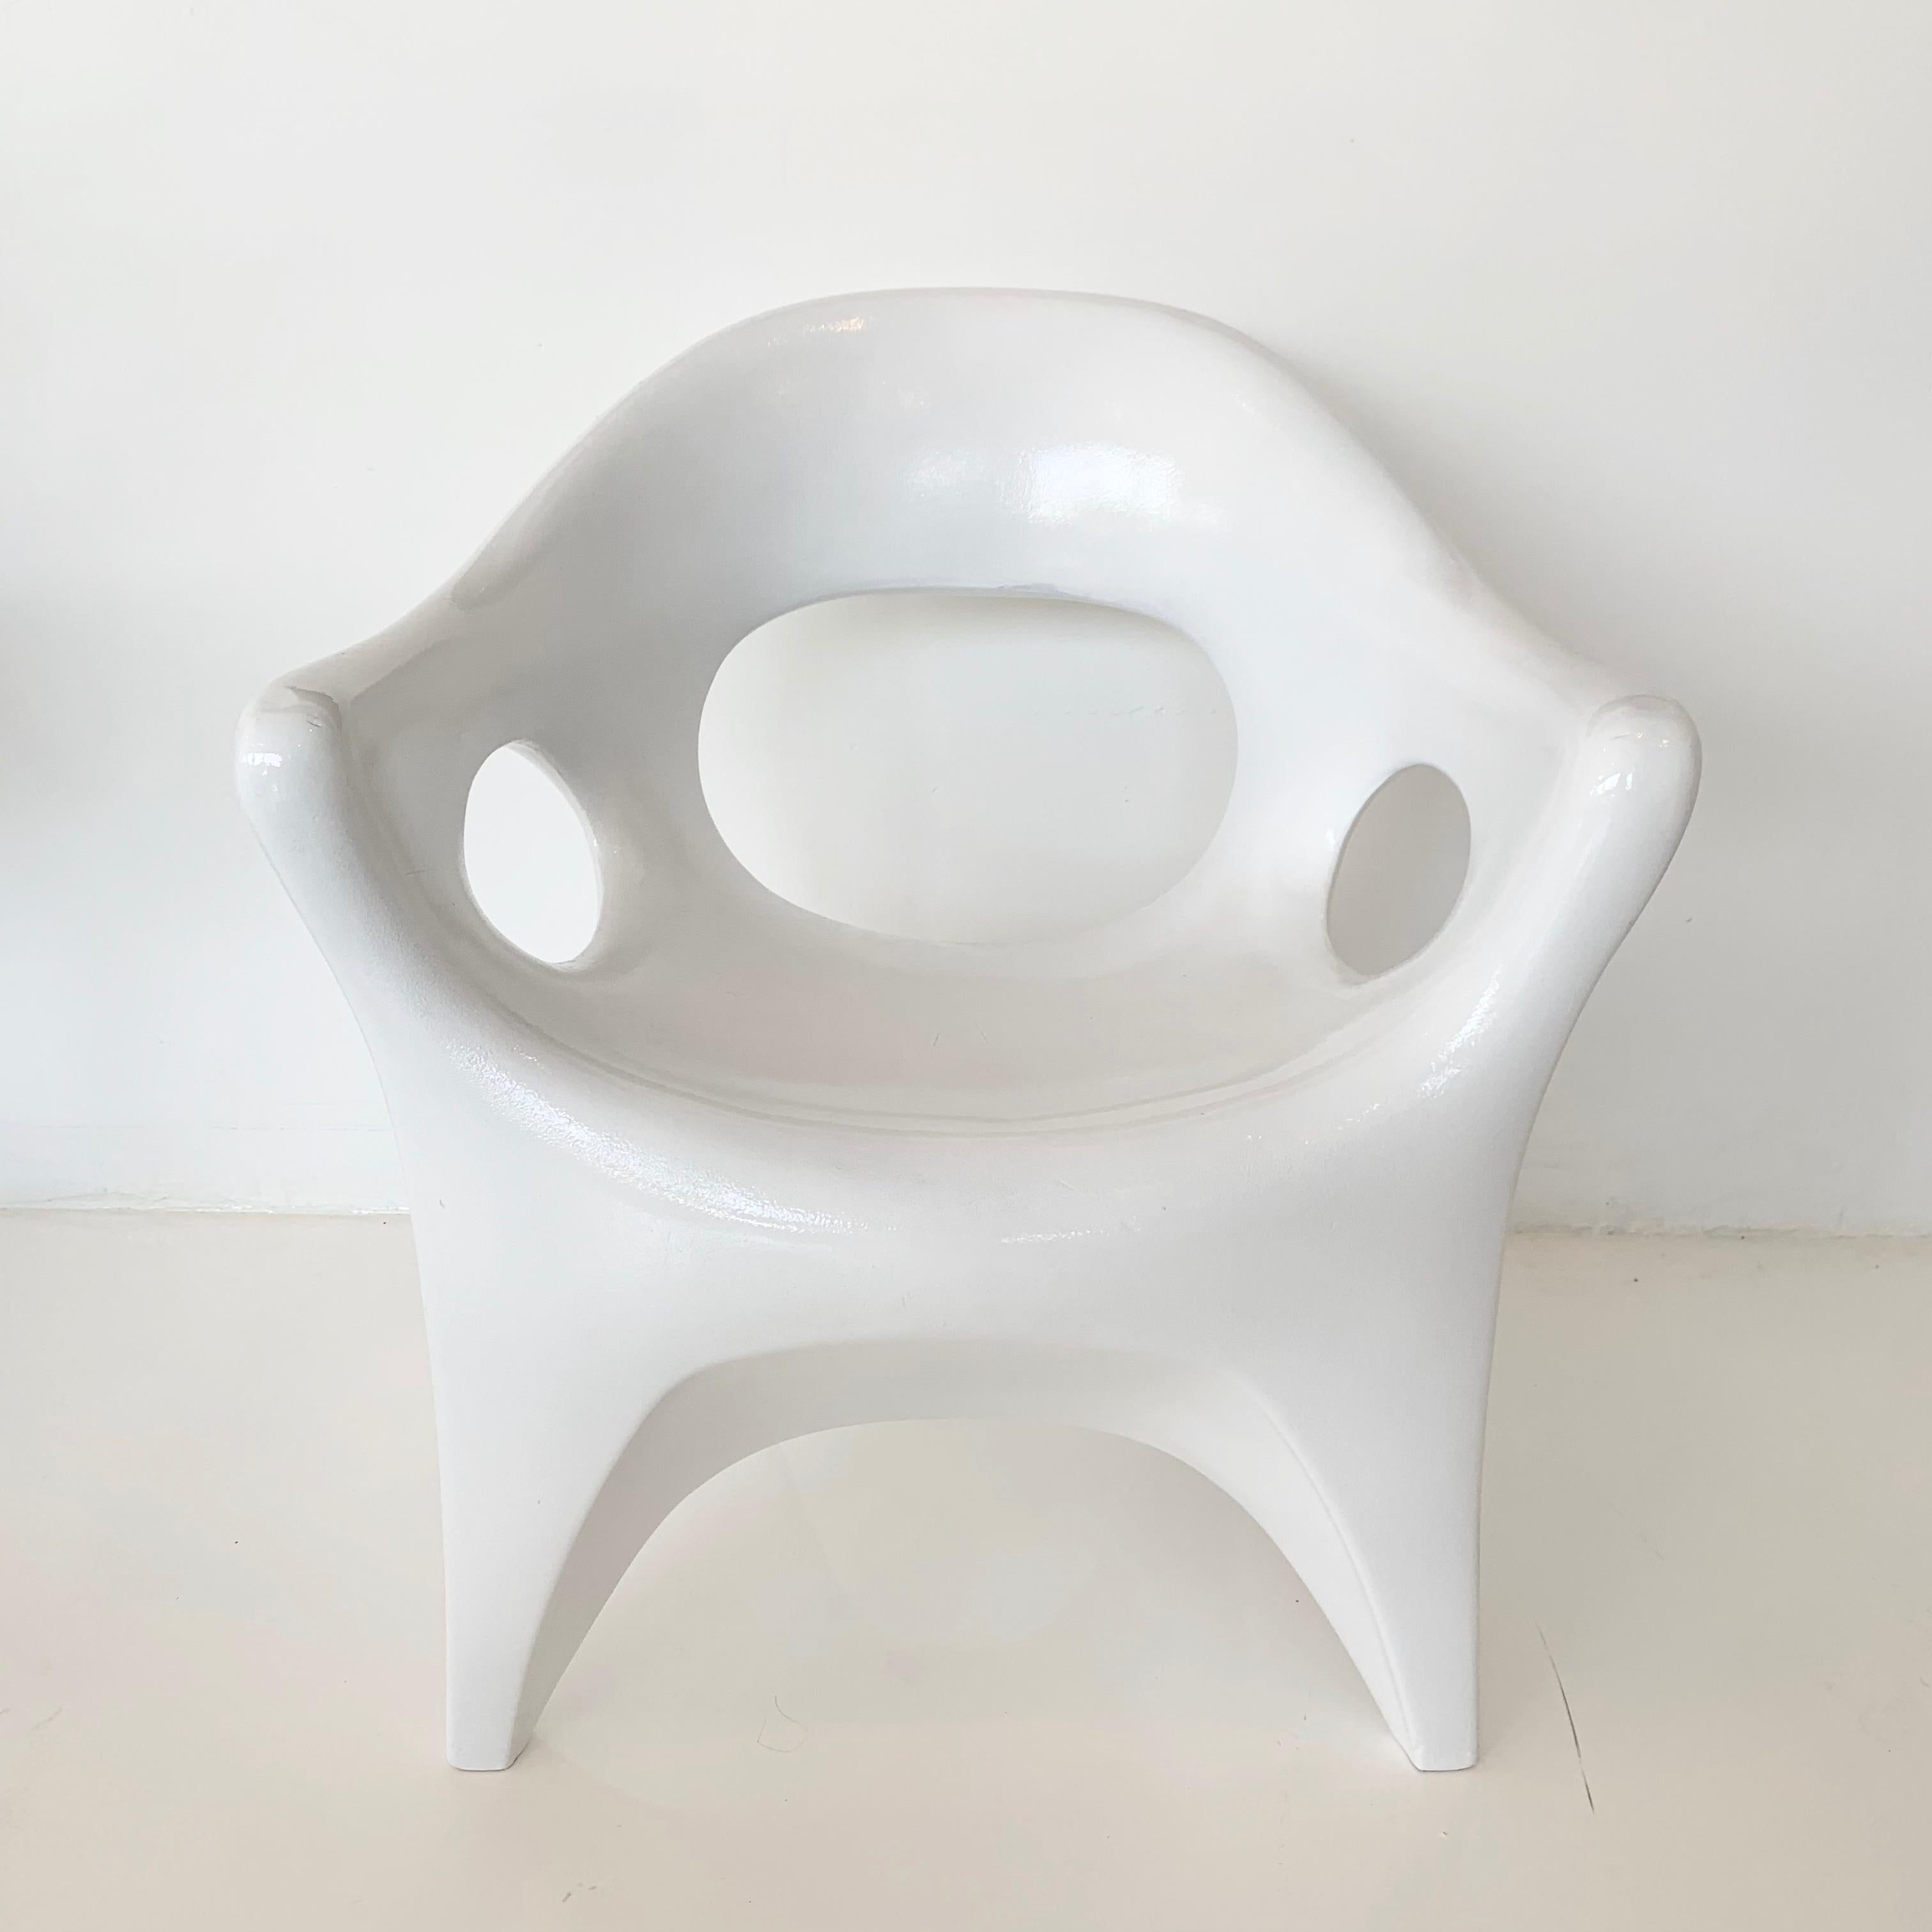 Rare white space age chairs. Designed by Mid-Century Modern designer John Gale.

Patented in 1963, each one has patent number stamped and John Gale logo. Design was used to develop Rotocast technology which was used later in the 1960s on other